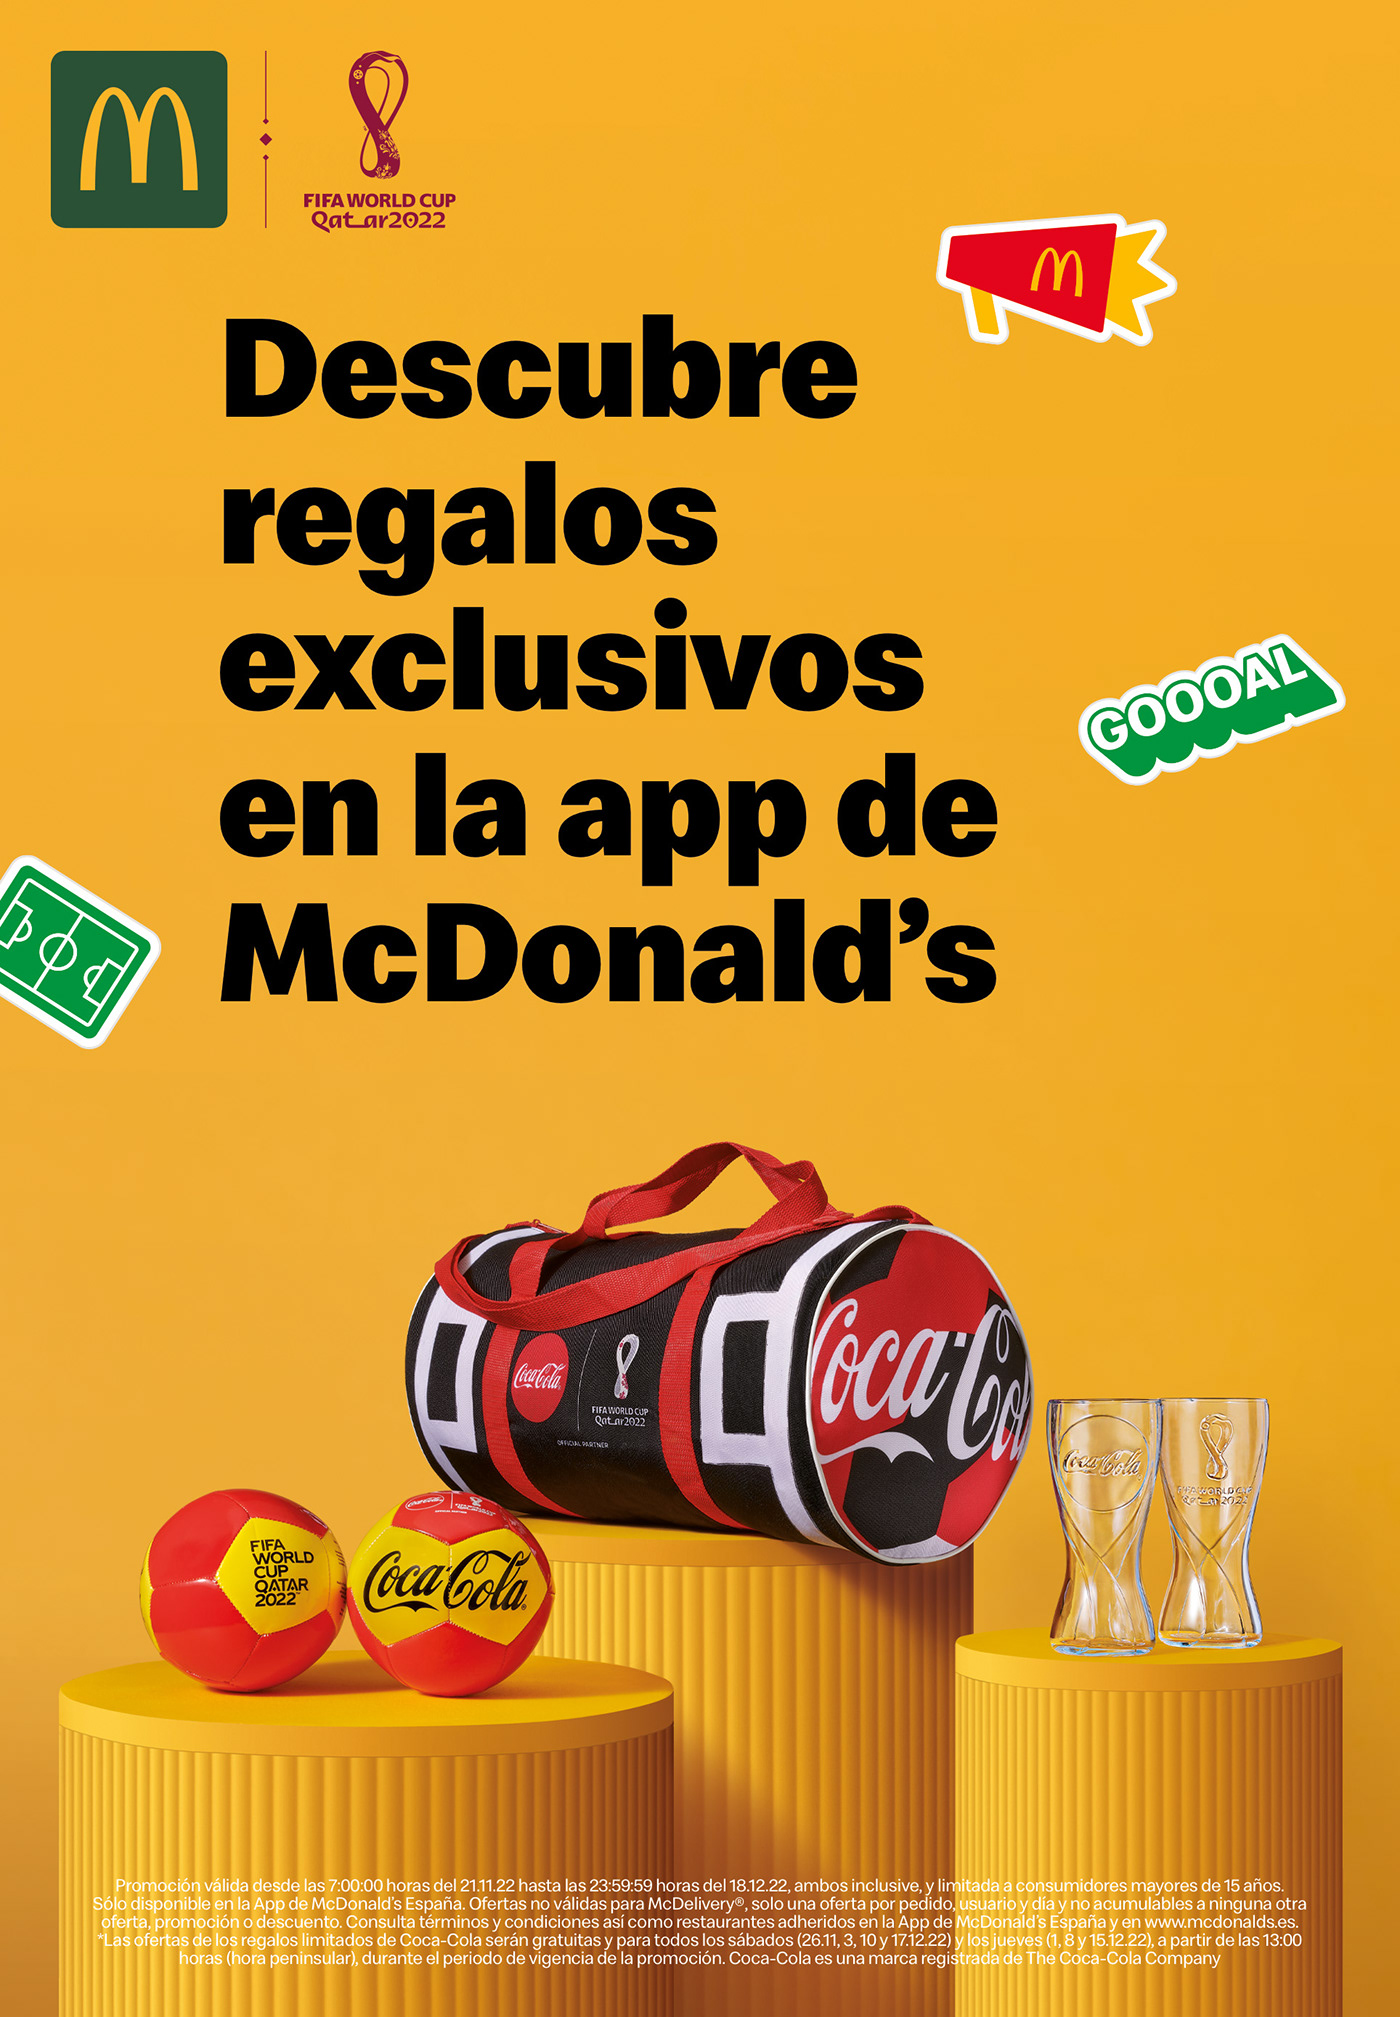 cocacola football mcdonald's print Promotion Qatar 2022 spain worldcup2022